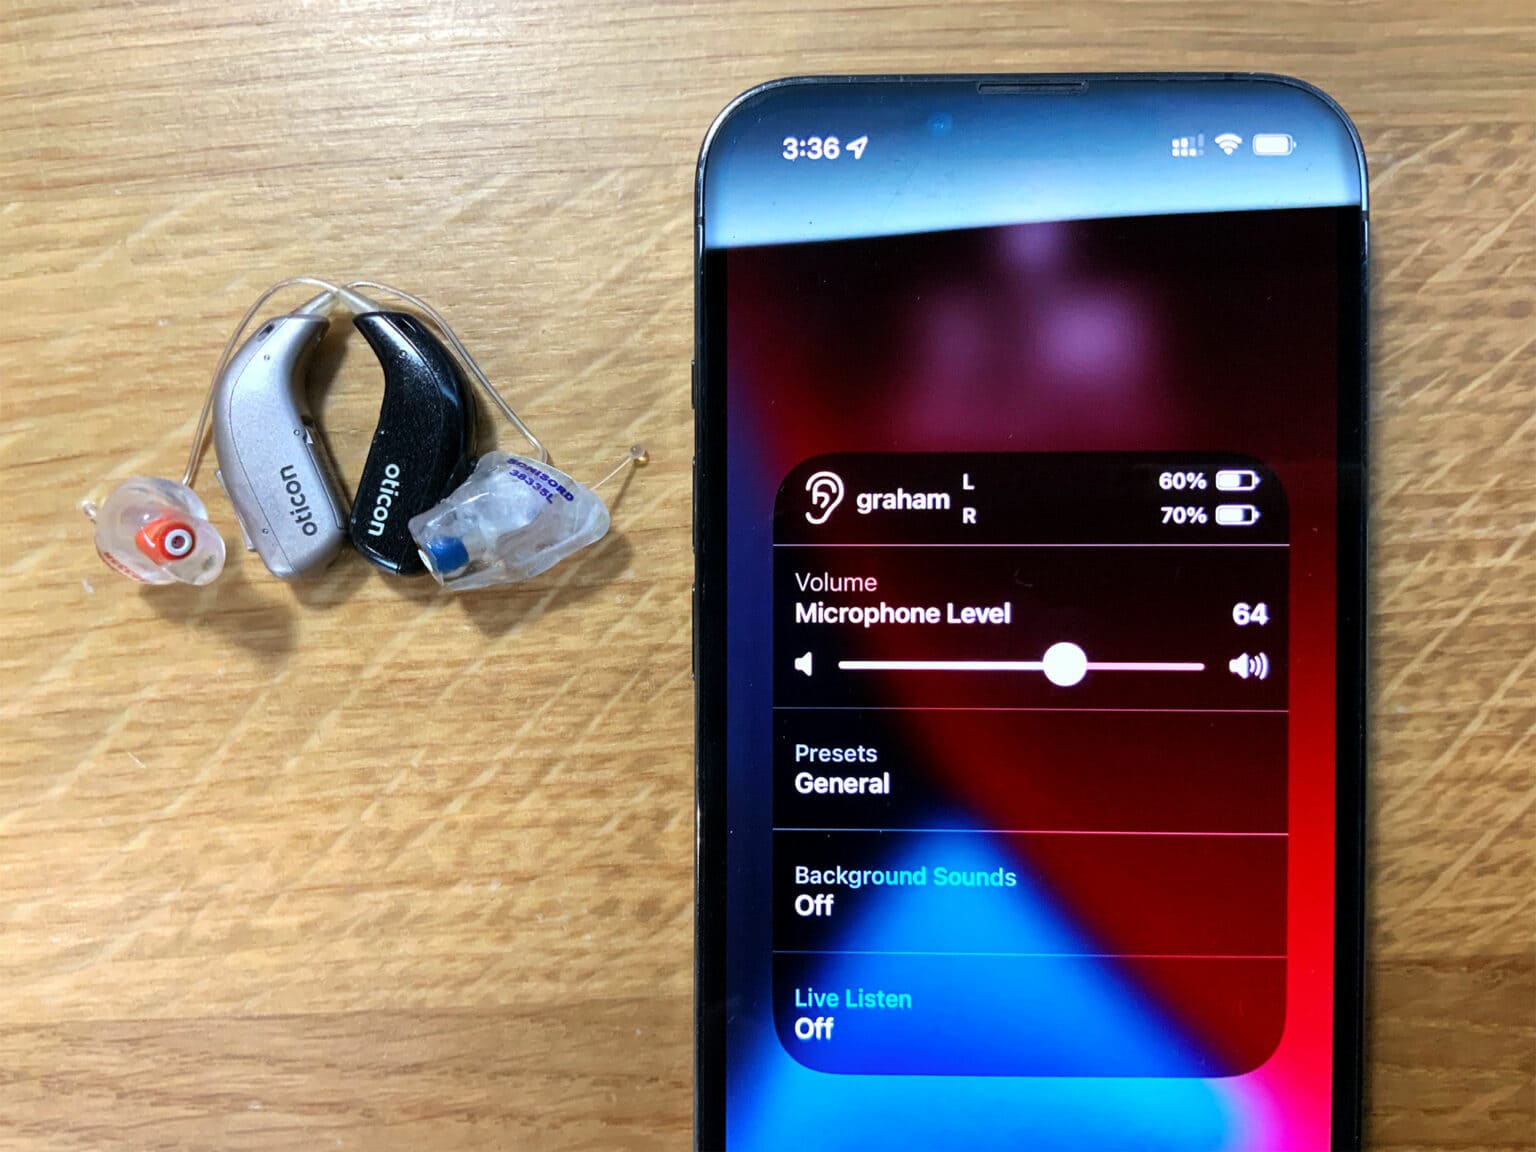 Made for iPhone hearing aids, like Oticon More, connect directly with your iPhone.